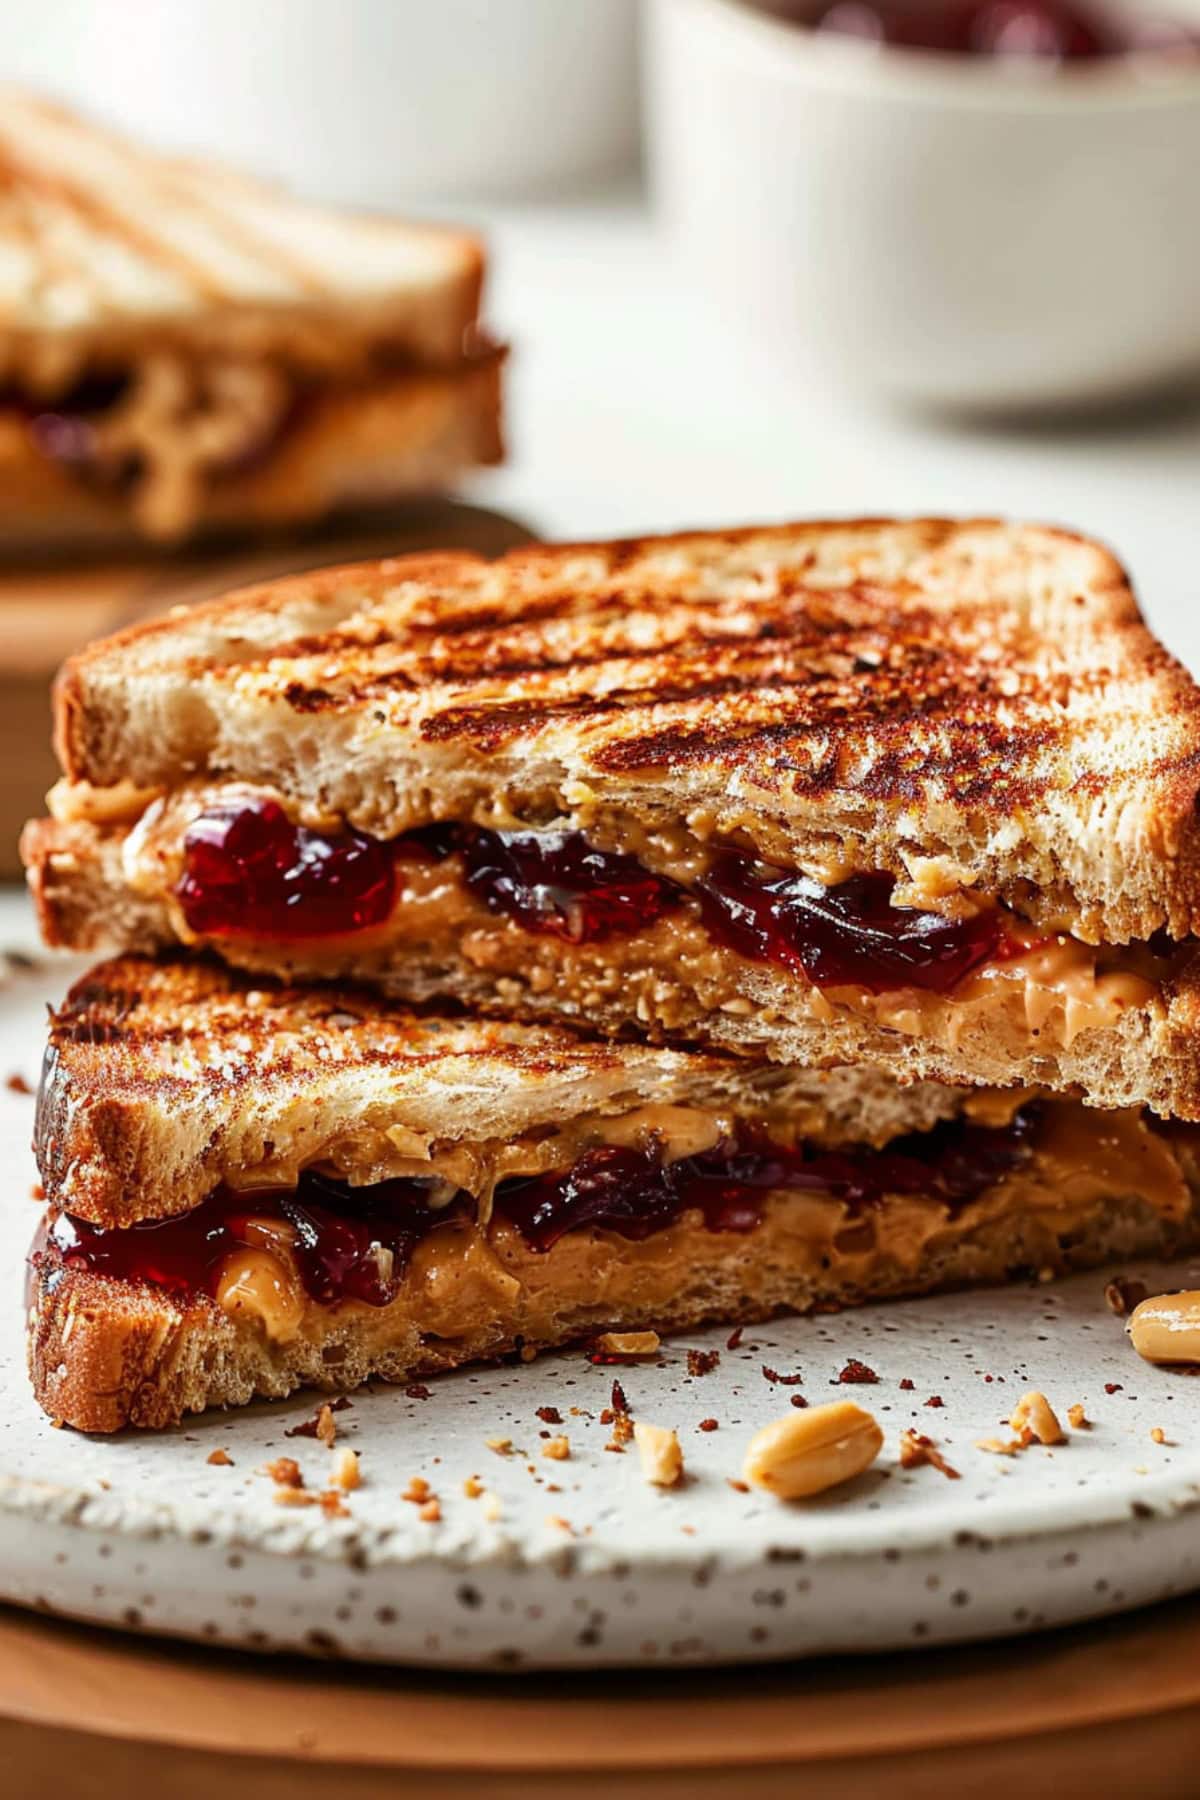 Sandwich with peanut butter and jelly filling in a plate.